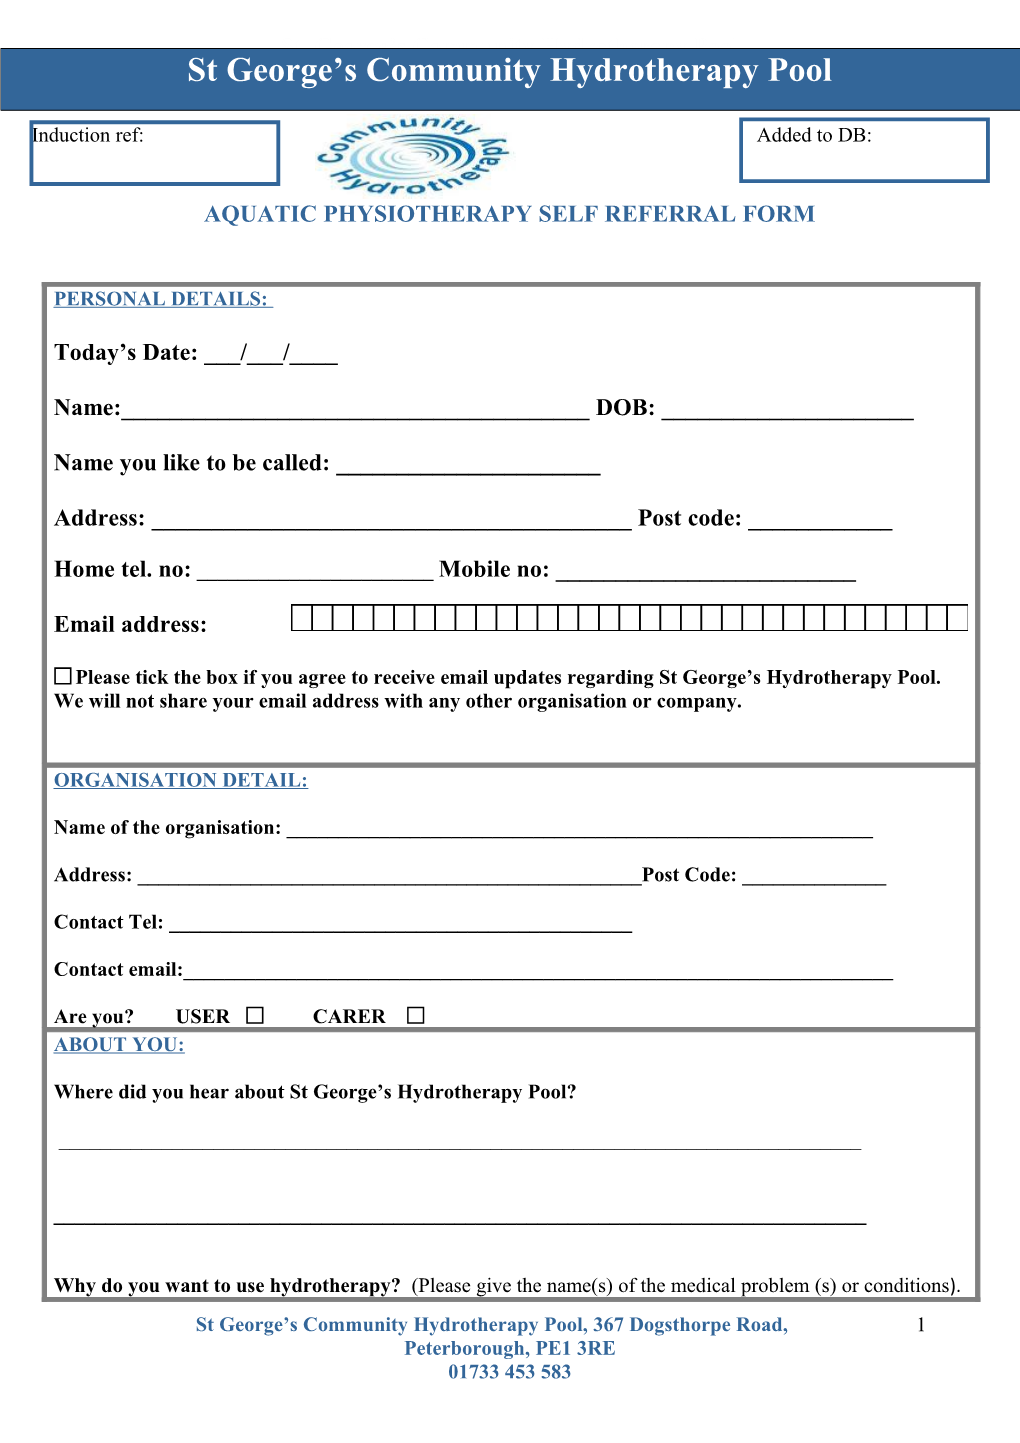 Aquatic Physiotherapy Self Referral Form